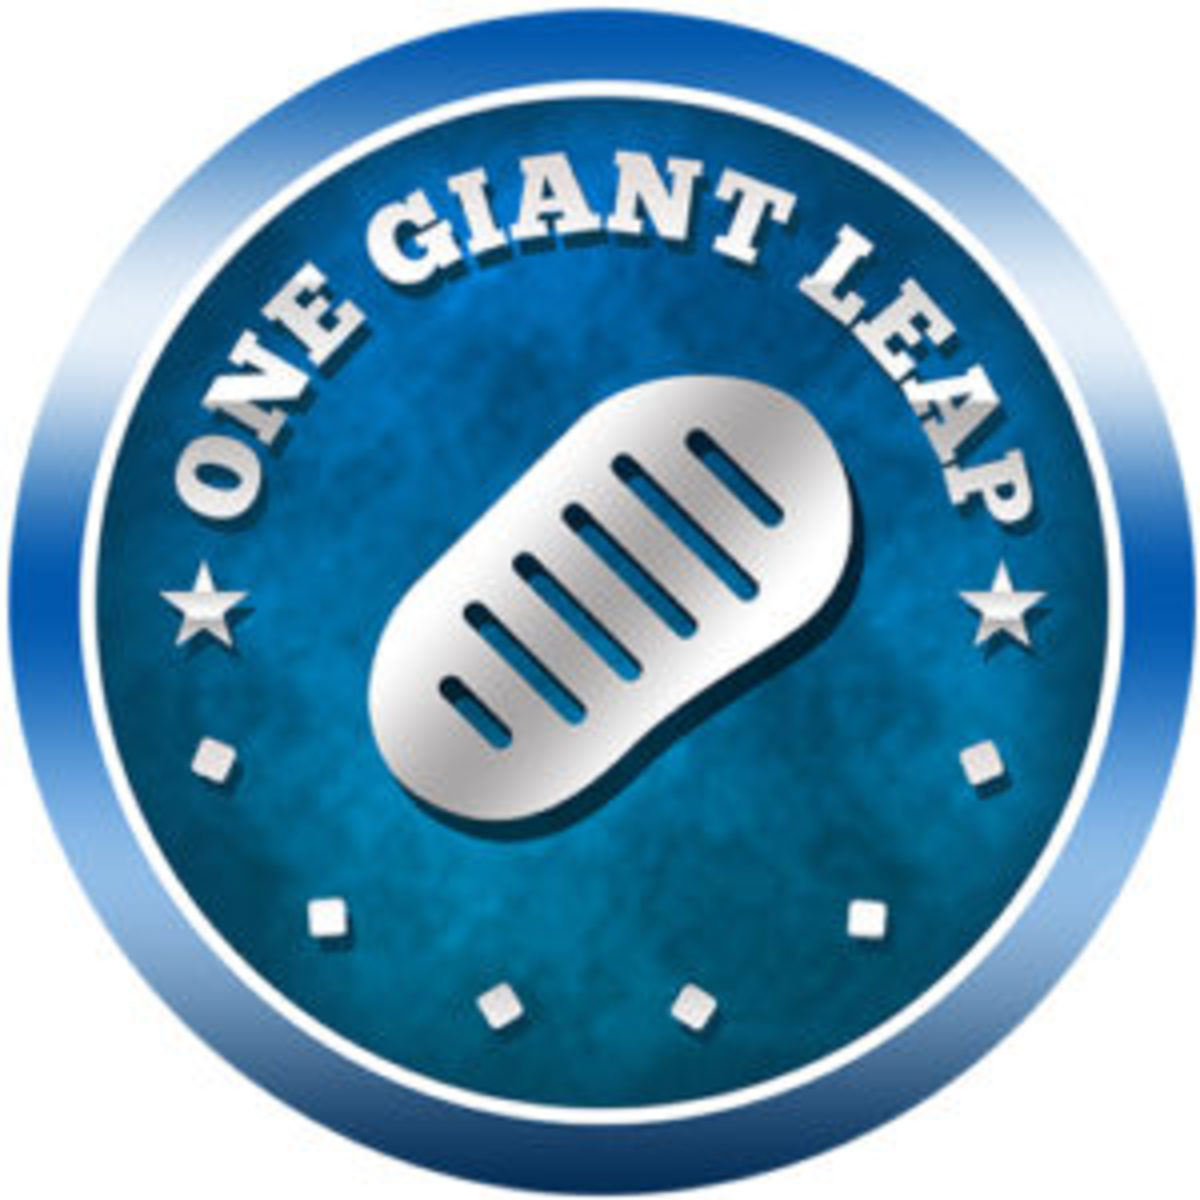  The “One Giant Leap” medal will be the first to be earned by collectors.